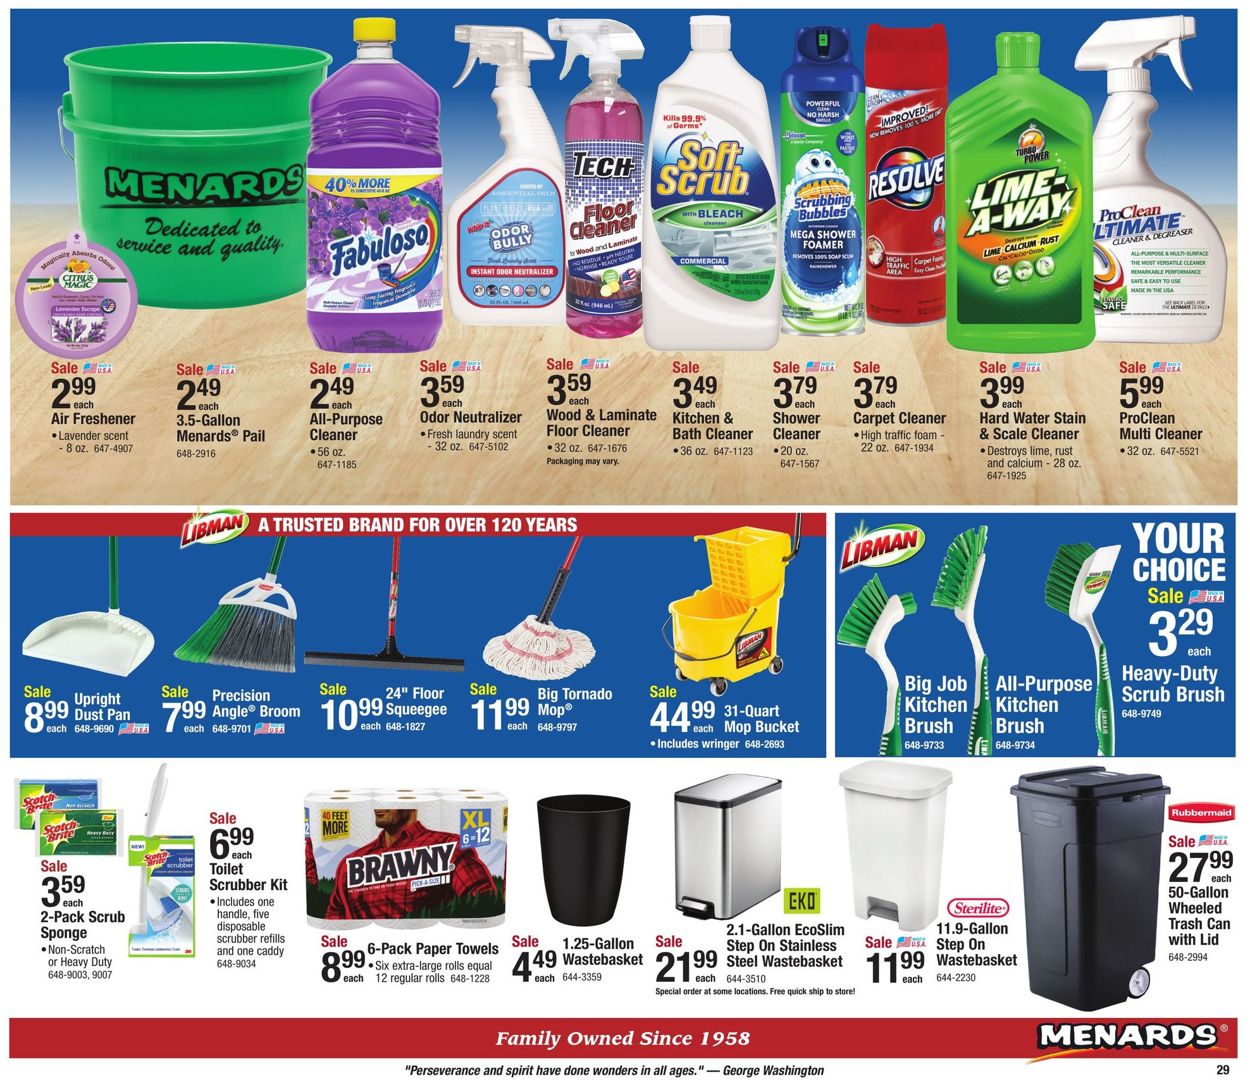 Menards Current weekly ad 06/23 - 07/06/2019 [32] - frequent-ads.com